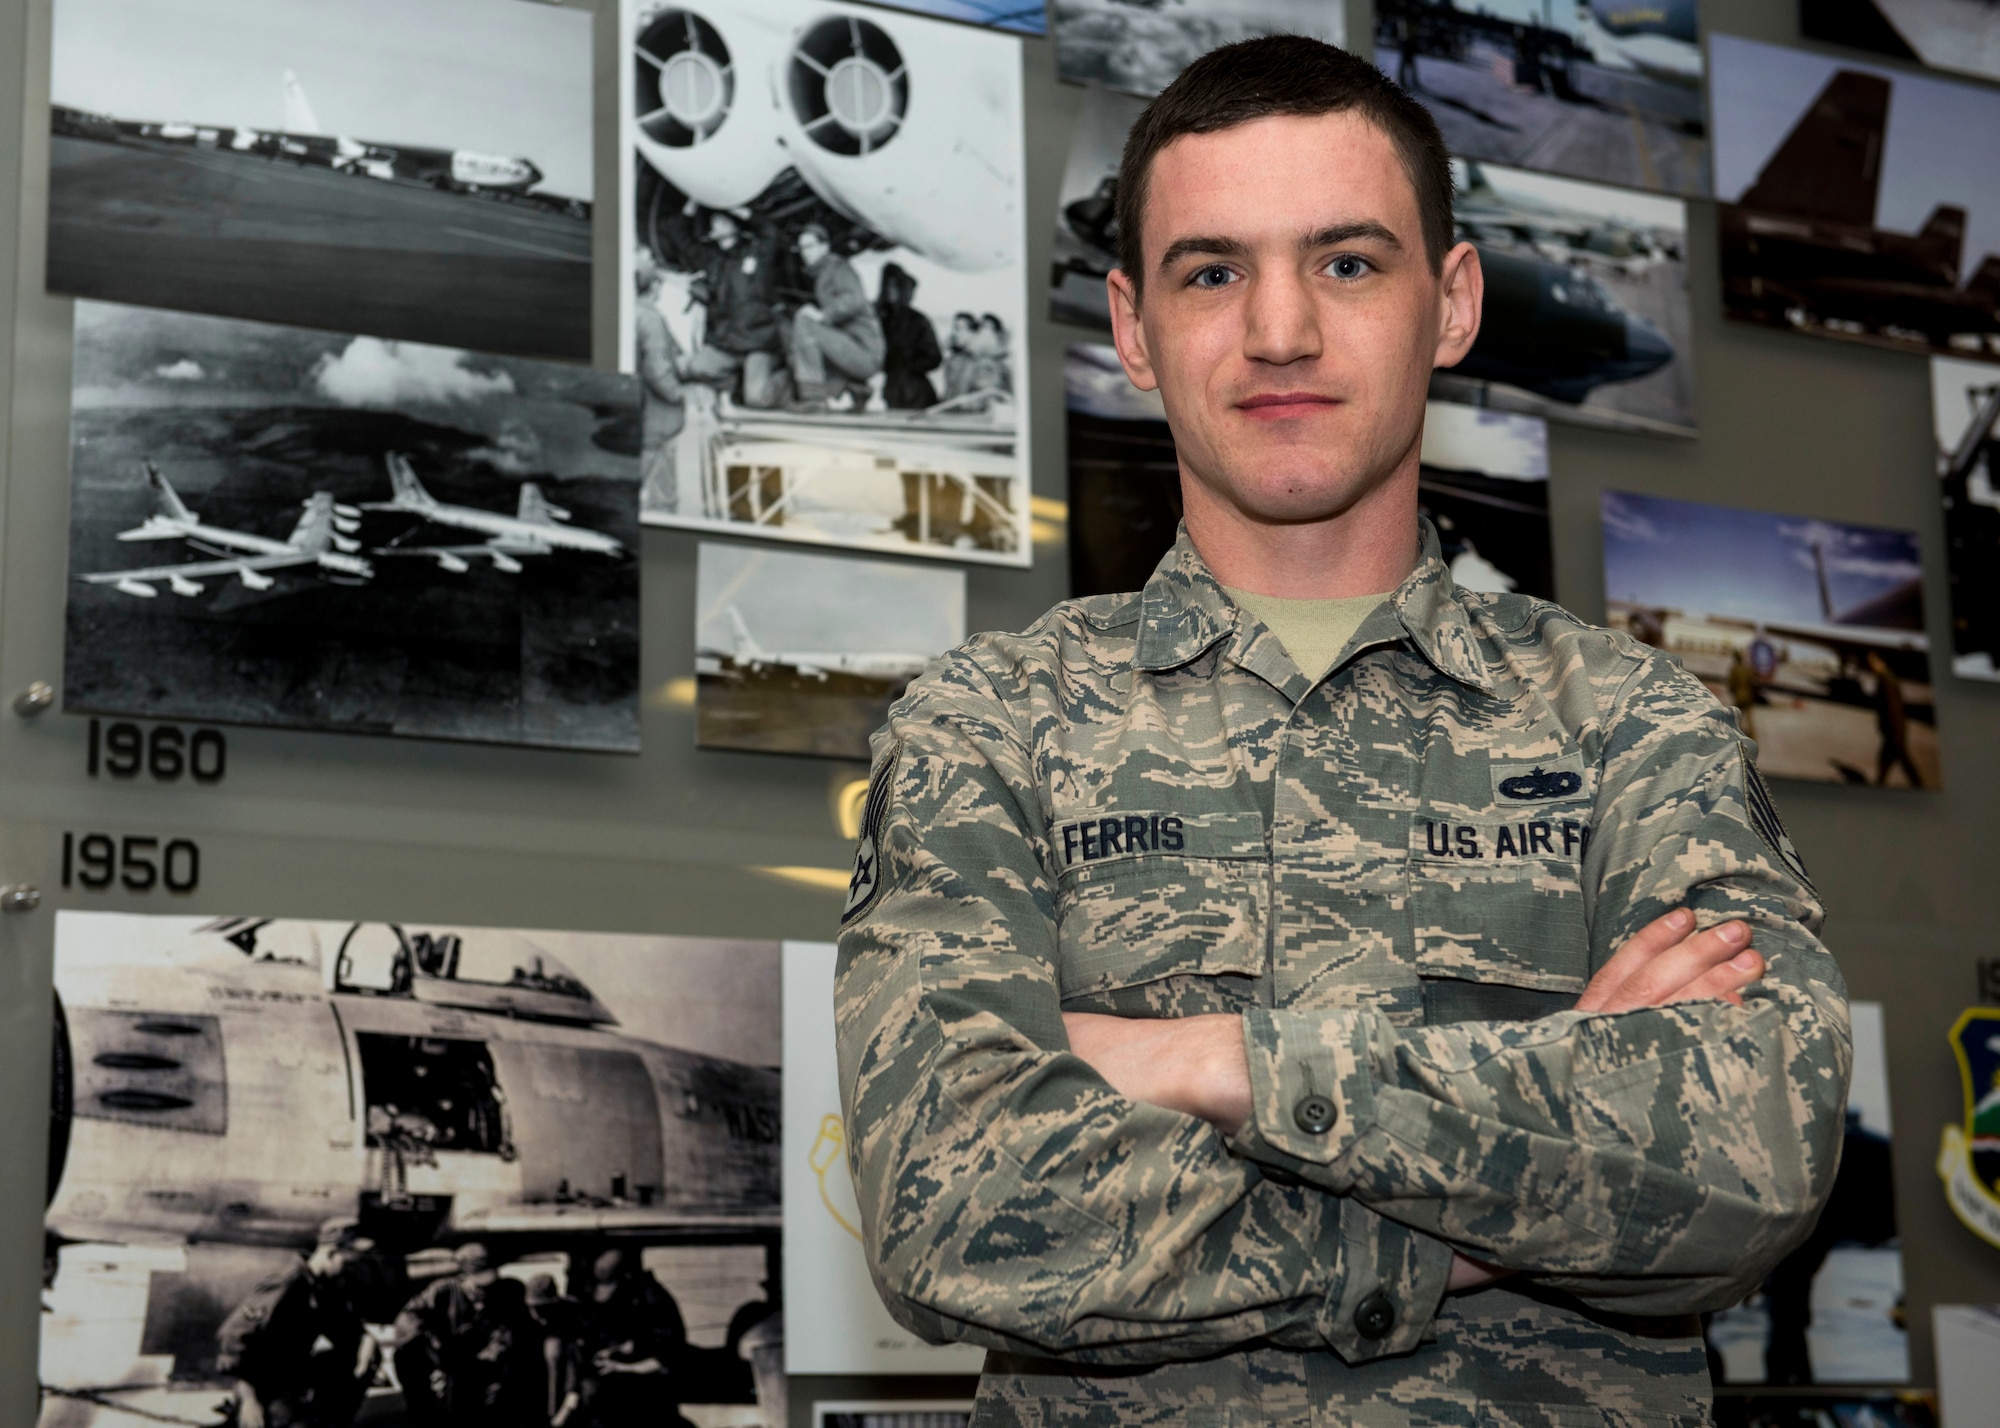 U.S. Air Force Staff Sgt. Tyler Ferris, 92nd Maintenance Group Air Force Repair Enhancement Program technician, poses for a photo at Fairchild Air Force Base, Washington, March 20, 2019. Ferris received a meritorious award from the Spokane Fire Department for his quick actions in providing life-saving aid to a victim of a car accident. (U.S. Air Force photo by Airman 1st Class Lawrence Sena)